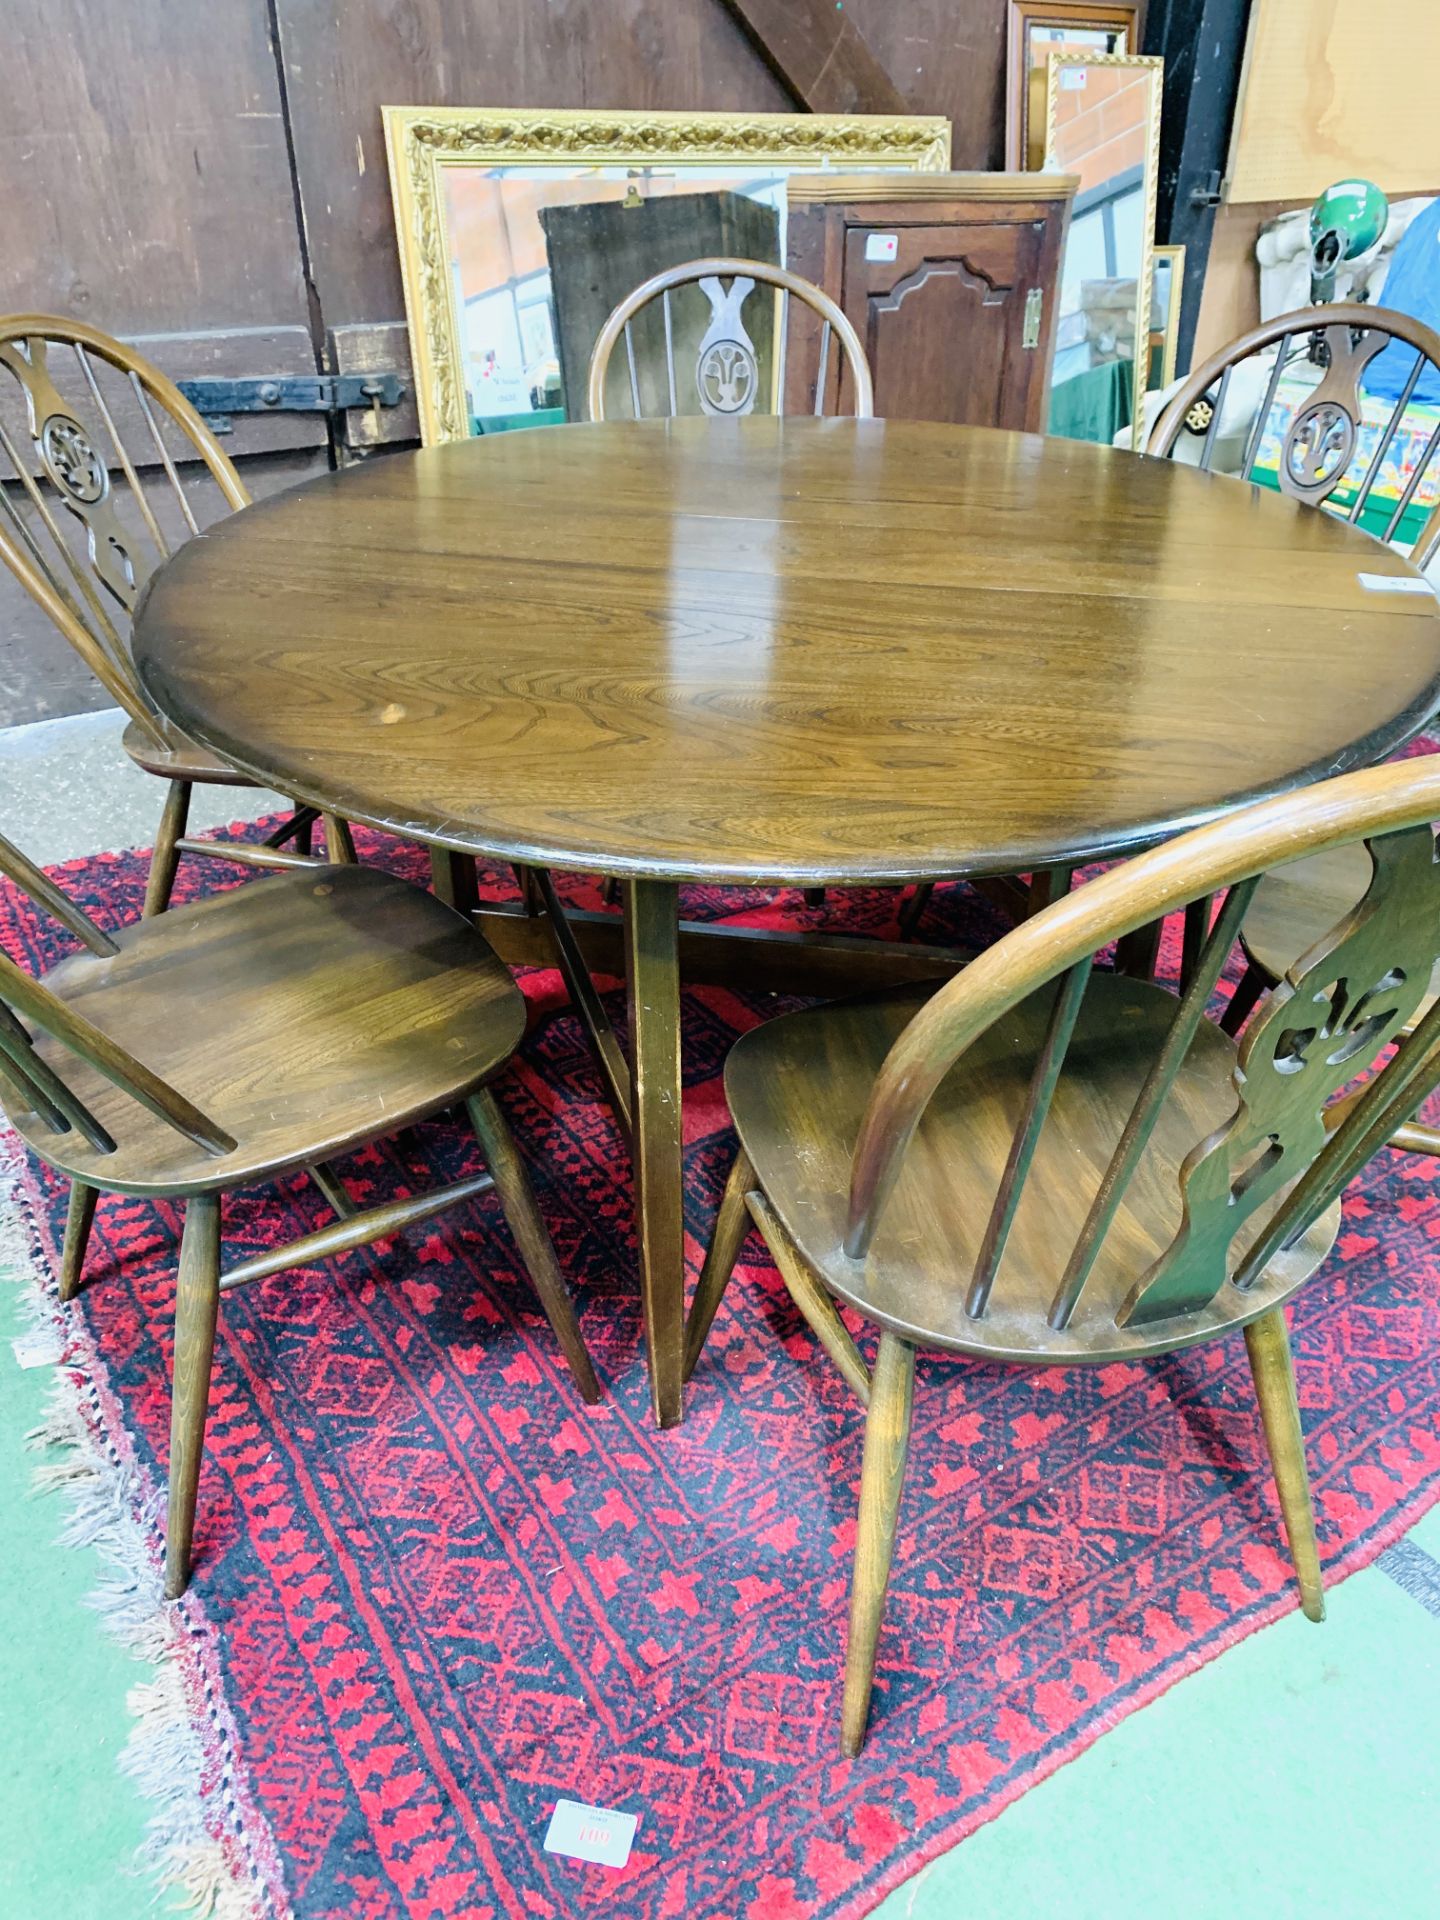 Ercol drop side dining table together with six Ercol Windsor style chairs. - Image 2 of 5